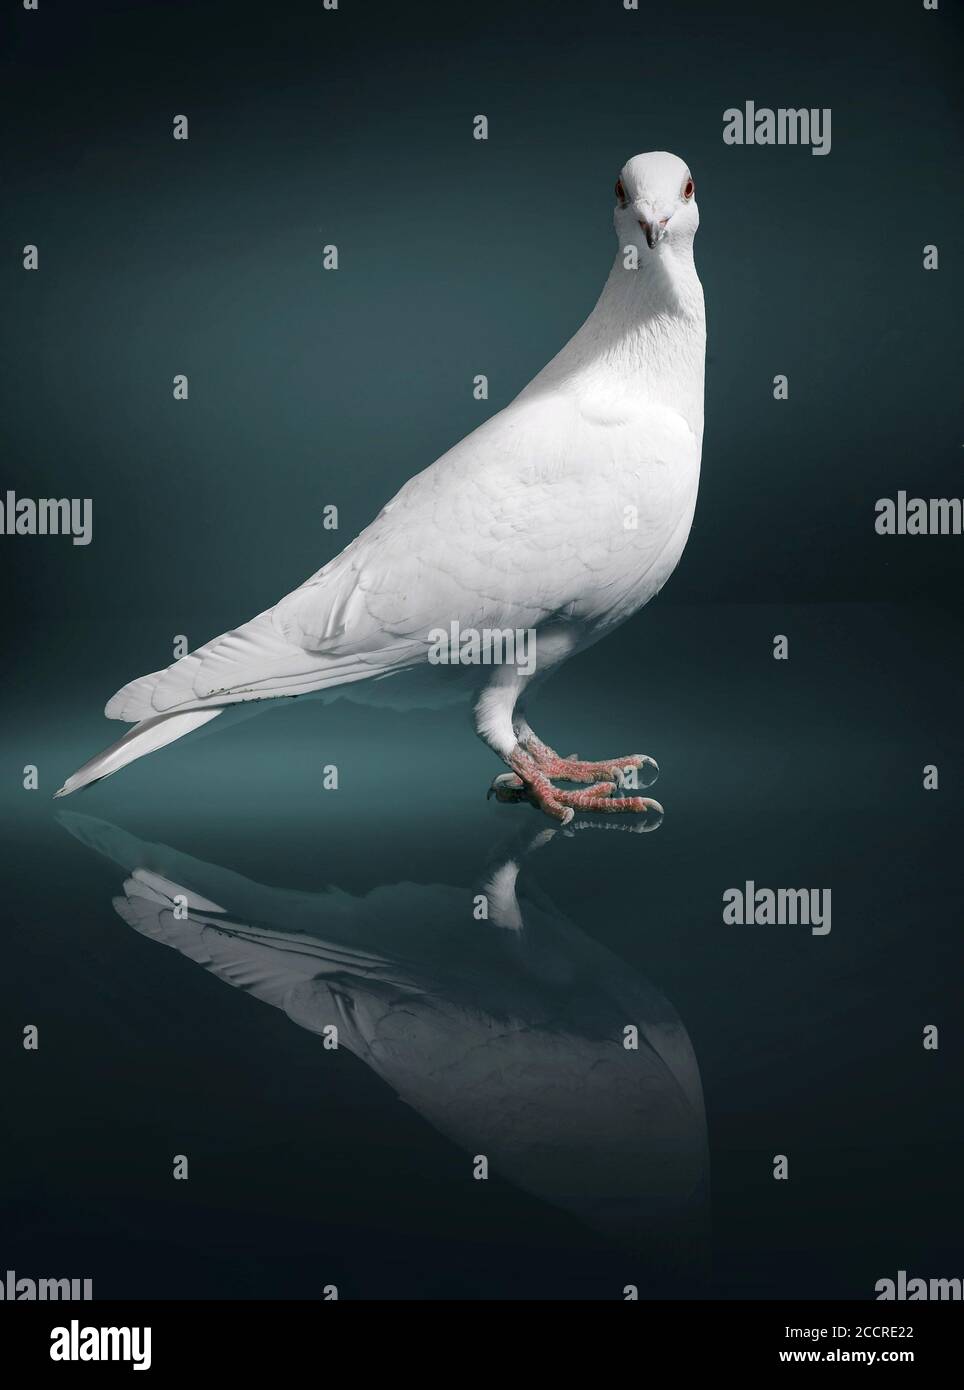 A white dove with red eyes stands on a black reflective plate and looks into the camera. Stock Photo